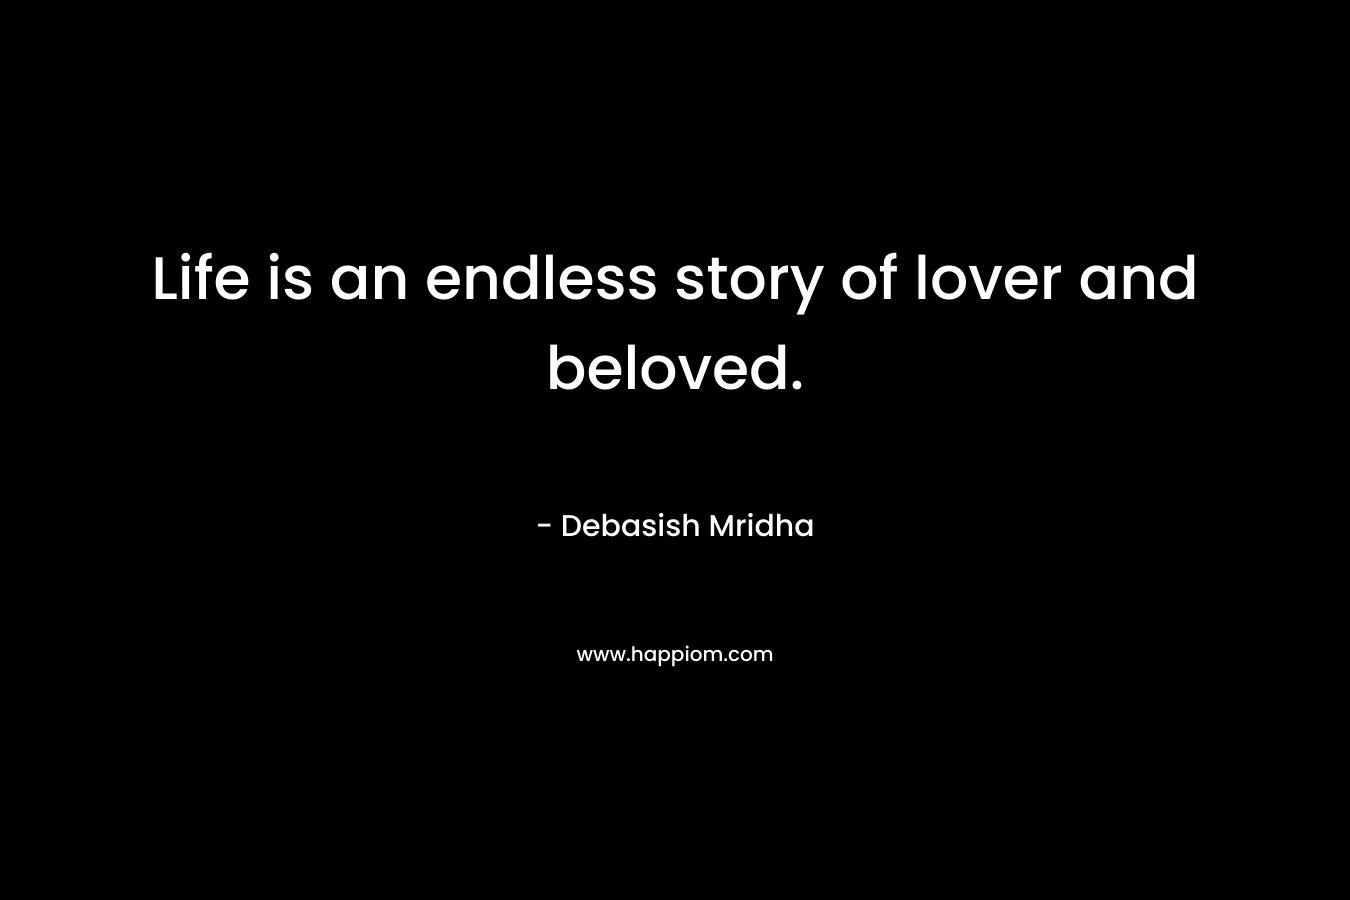 Life is an endless story of lover and beloved.